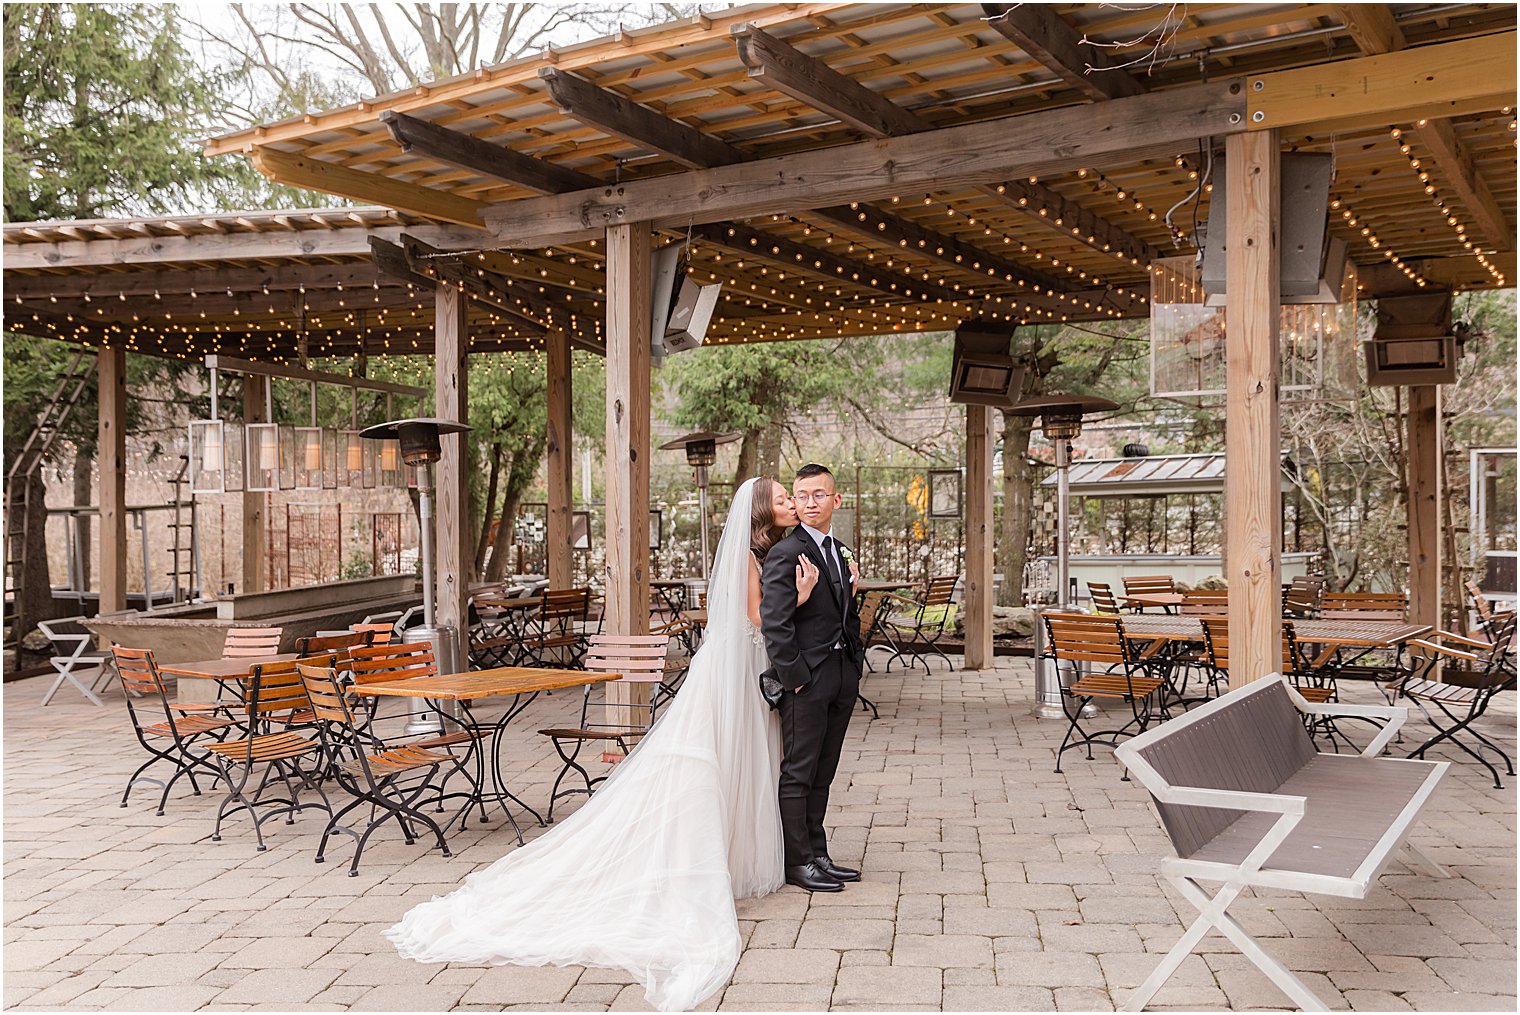 newlyweds pose on outdoor patio